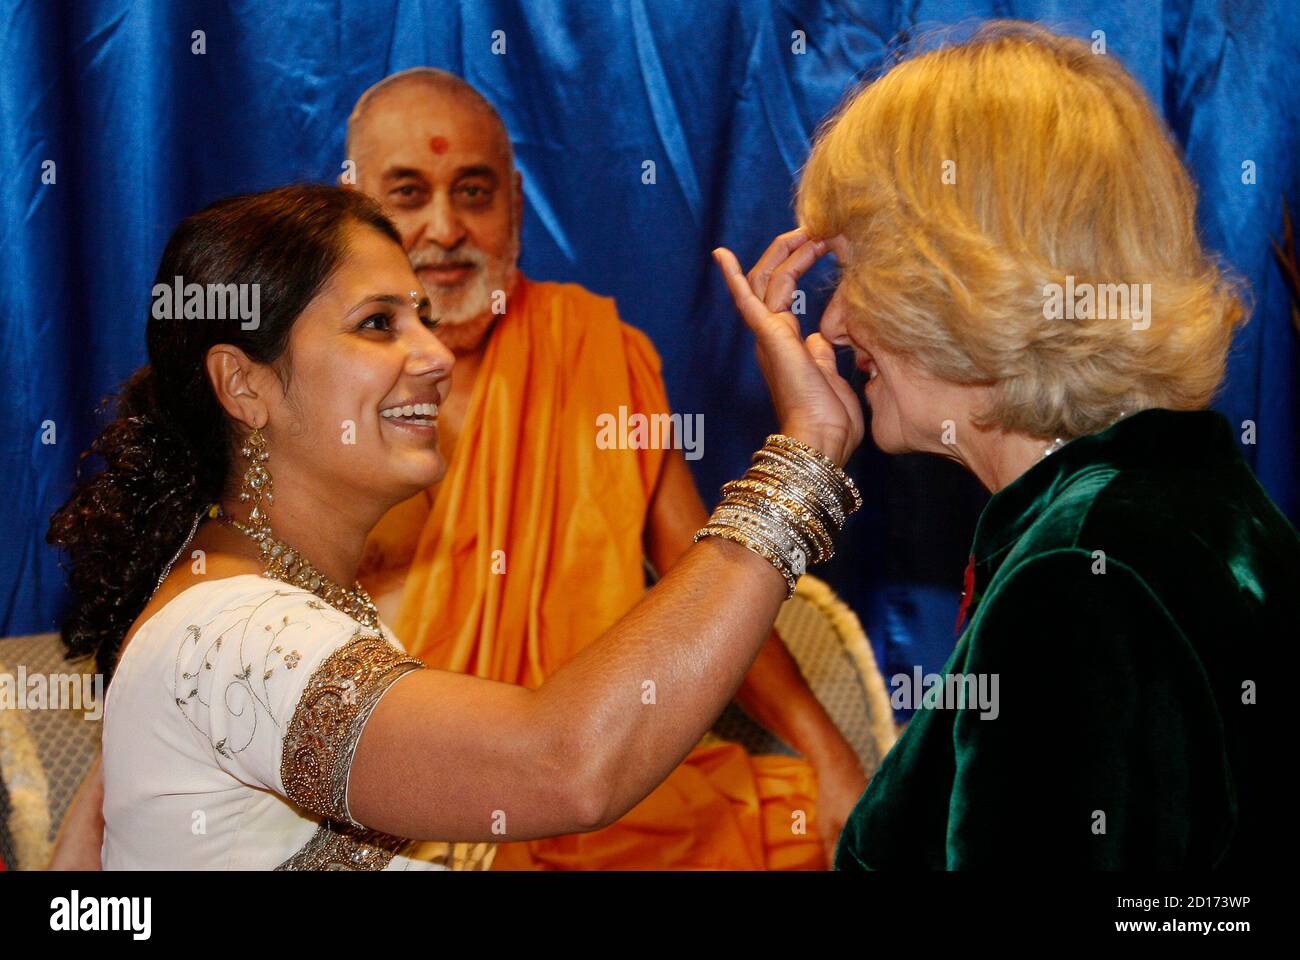 britains-camilla-duchess-of-cornwall-r-is-given-a-tikka-marking-as-she-participates-in-diwali-preparations-with-volunteers-during-a-visit-to-shri-swaminarayan-temple-in-northwest-london-november-9-2007-britains-camilla-duchess-of-cornwall-and-prince-charles-were-visiting-the-temple-for-celebration-of-the-hindu-festival-of-diwali-reuterstoby-melville-britain-2D173WP.jpg